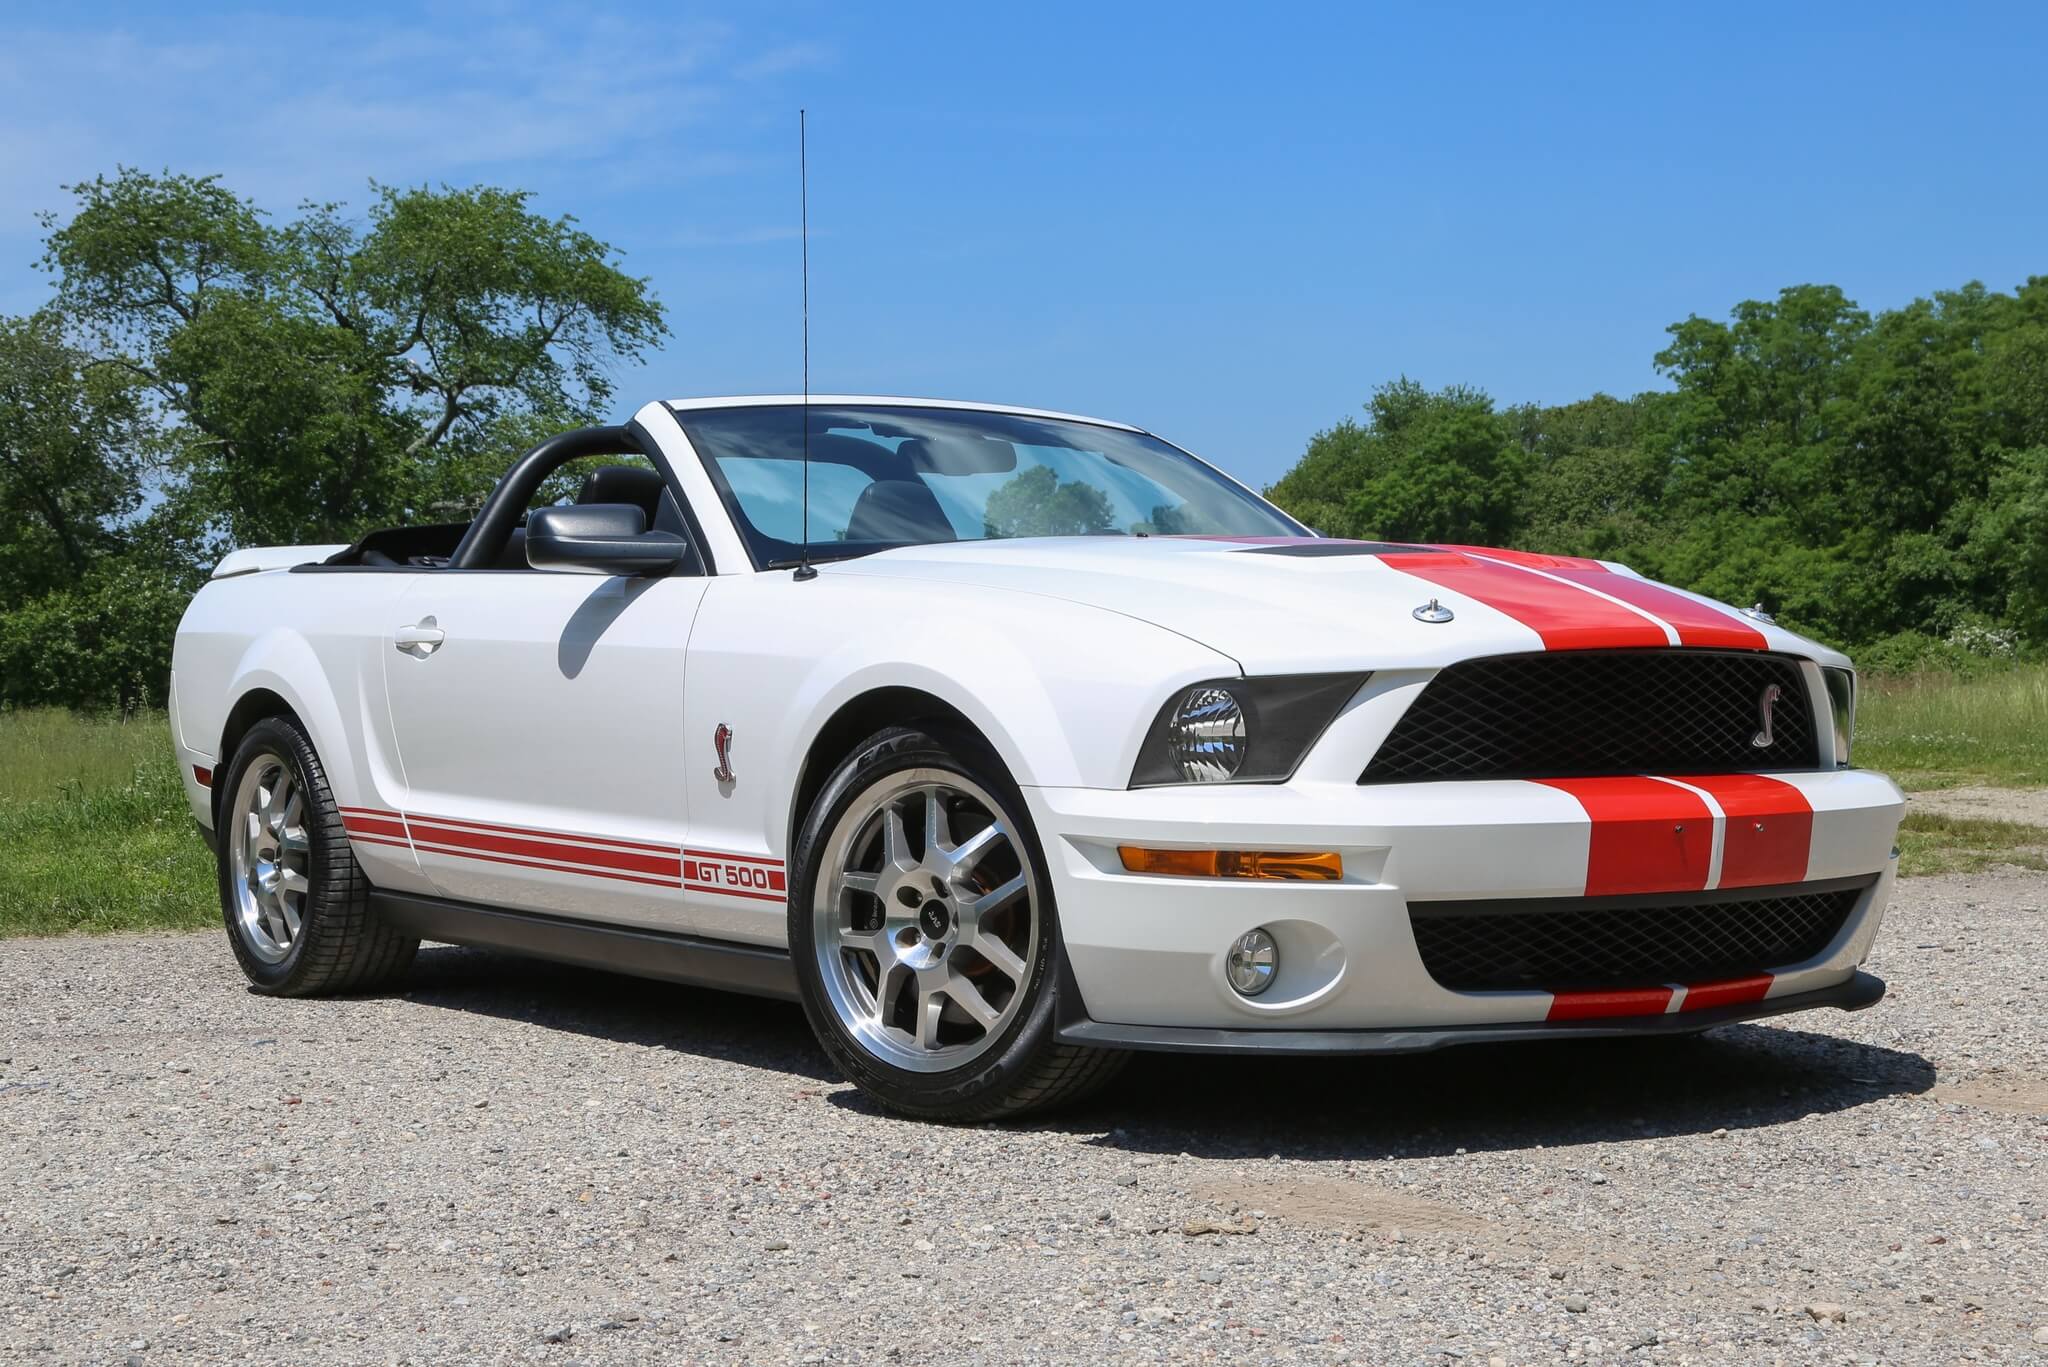 DT: 4k-Mile 2008 Ford Mustang Shelby GT500 Convertible 6-Speed